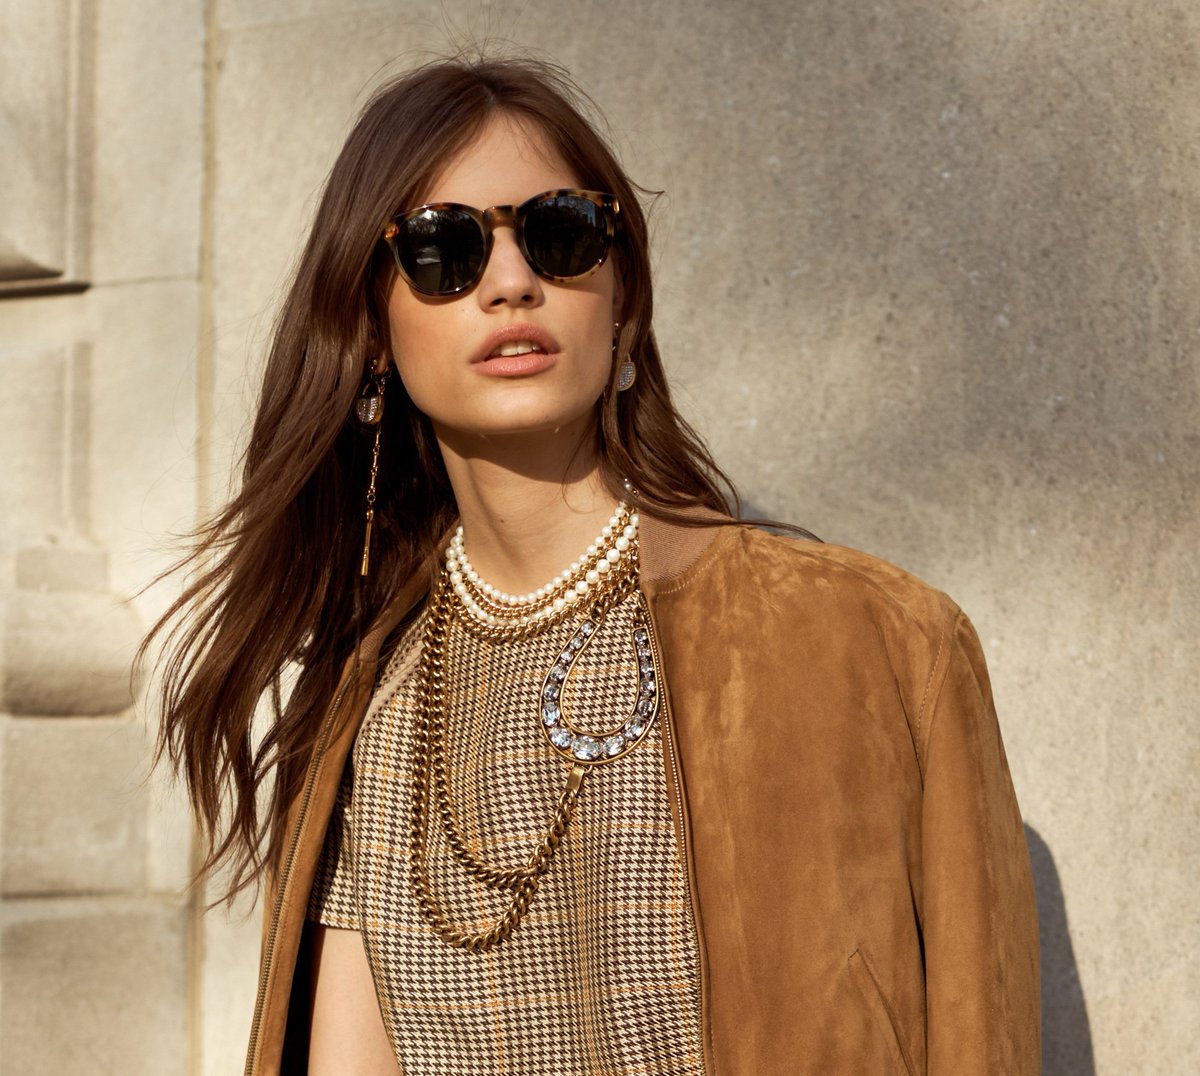 Ralph Lauren on Twitter: "The RL Bedford Sunglasses, worn with statement  jewelry from the Pre-Fall 2017 Collection. #RLIconicStyle  https://t.co/h1nKgEWJu8" / Twitter